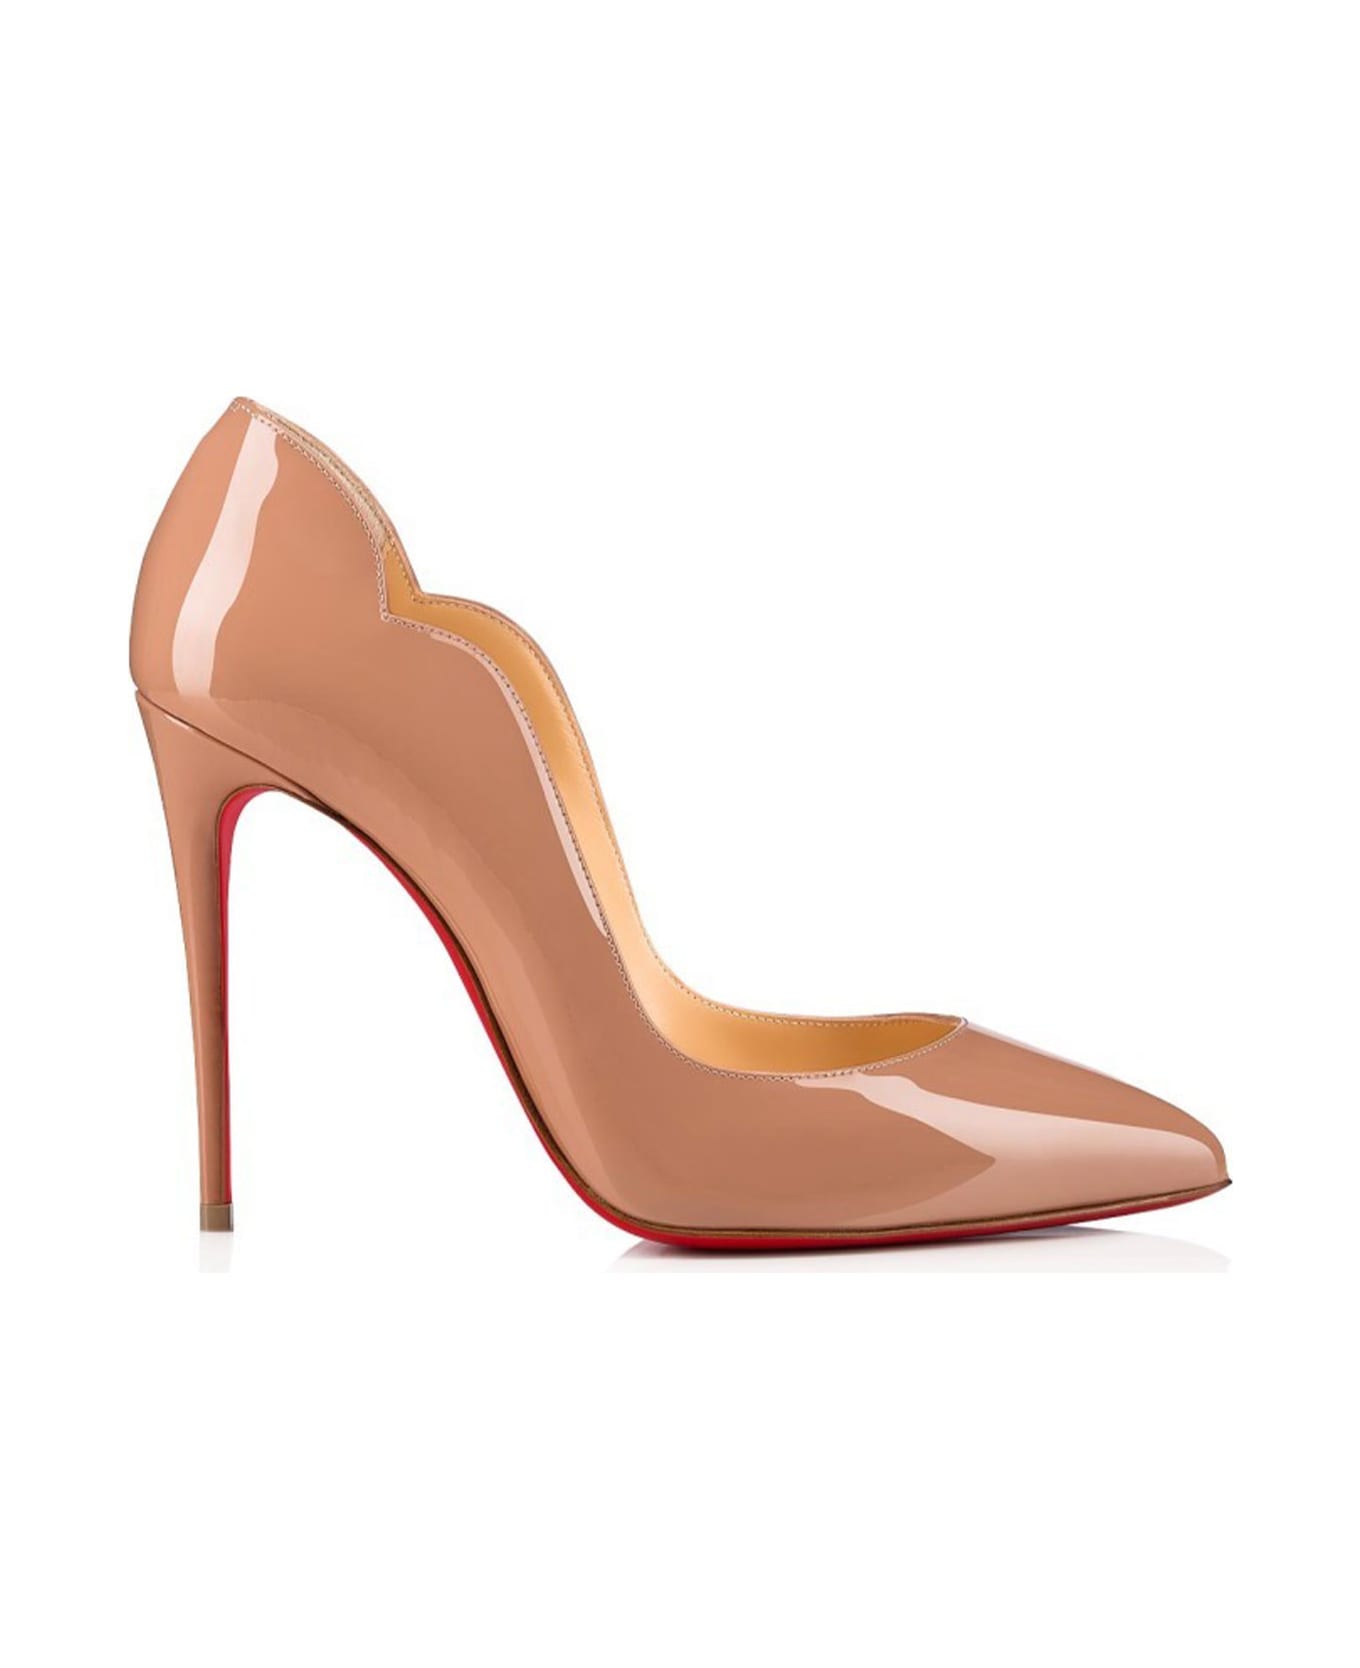 Christian Louboutin Hot Chick Décolleté In Nude Leather - NUDE ハイヒール